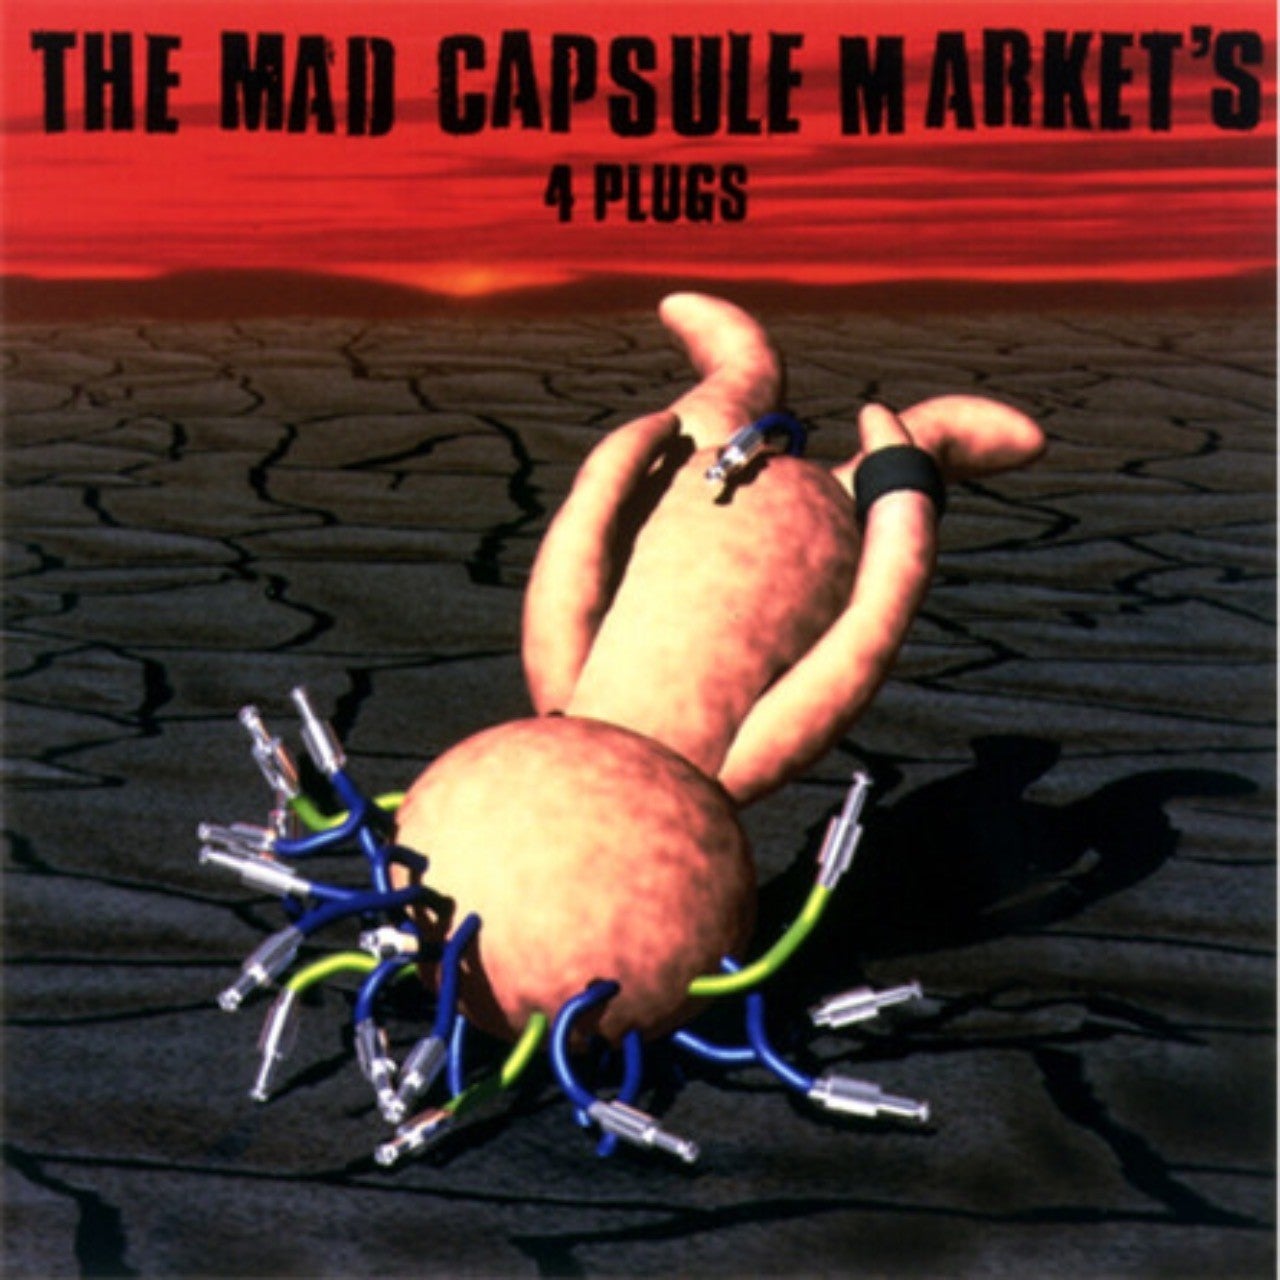 4 PLUGS / THE MAD CAPSULE MARKETS